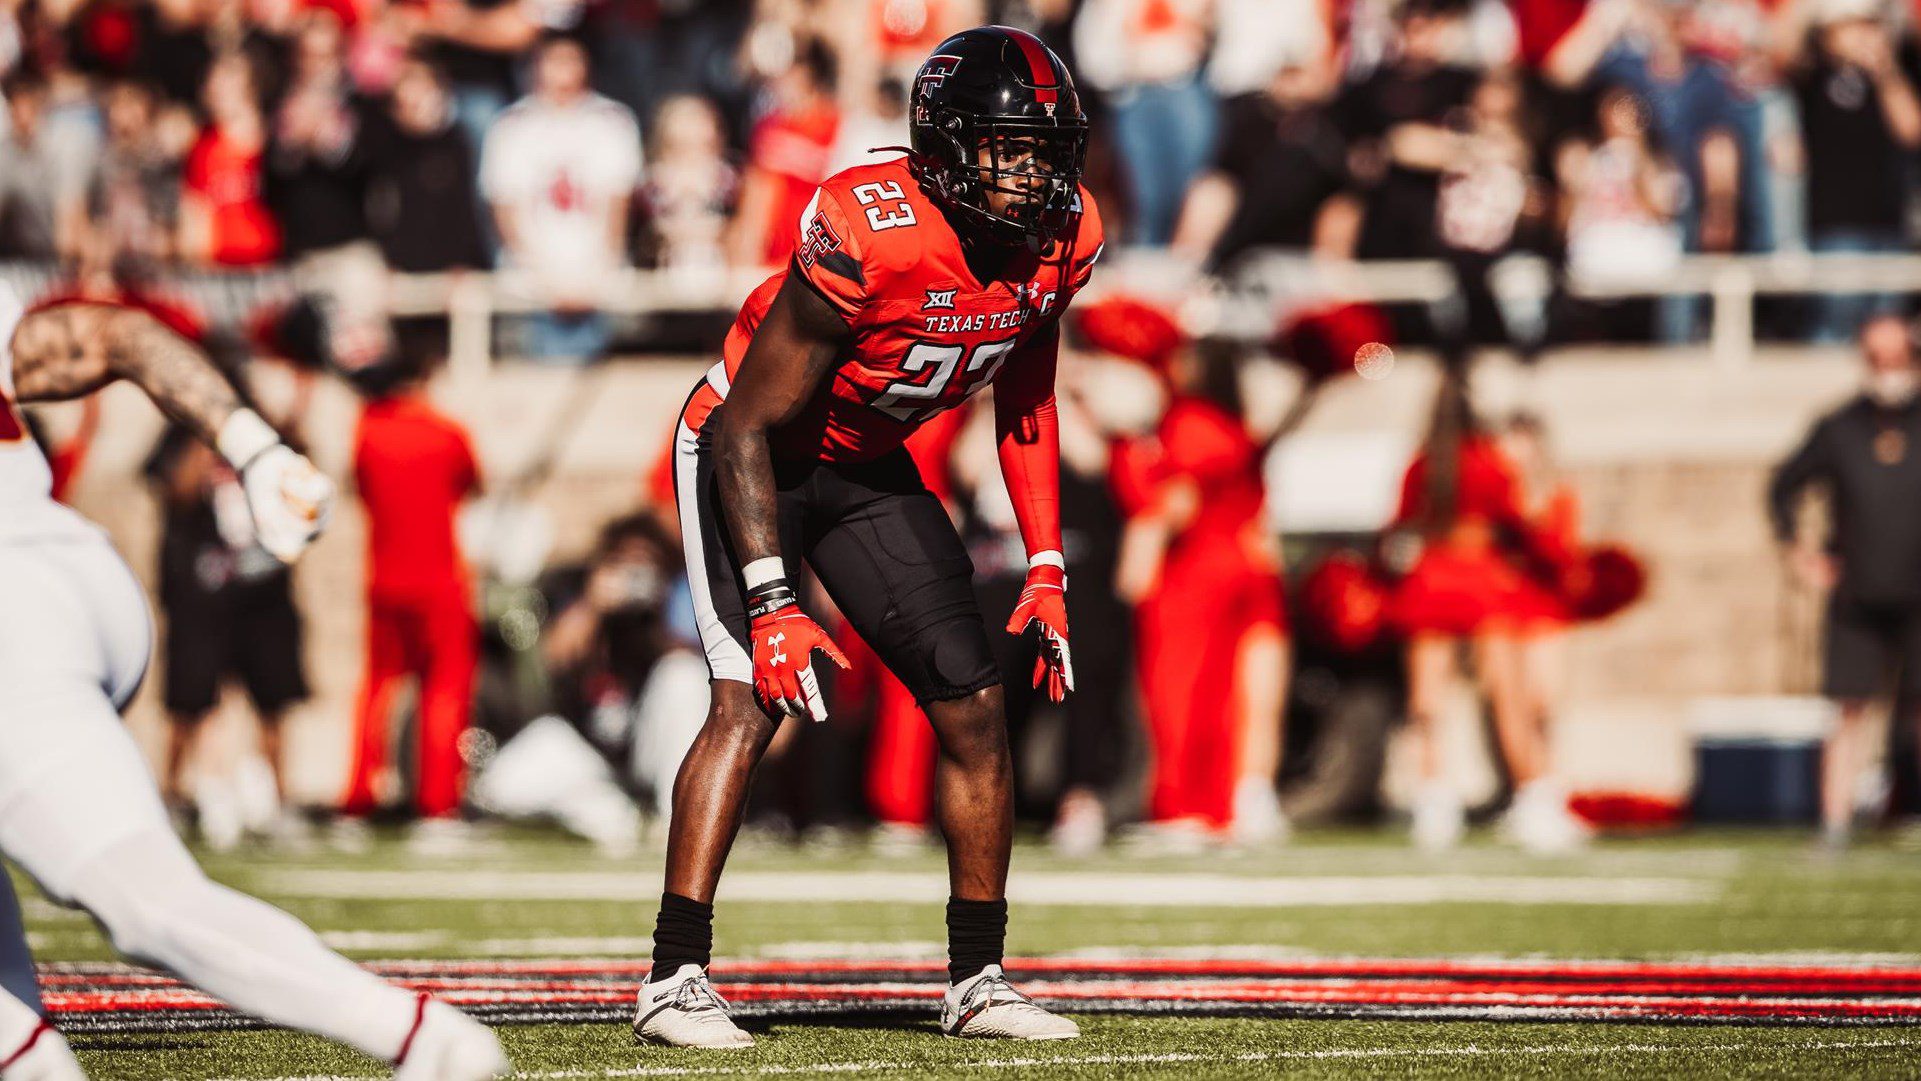 DaMarcus Fields the long defensive back from Texas Tech University recently sat down with NFL Draft Diamonds writer Justin Berendzen